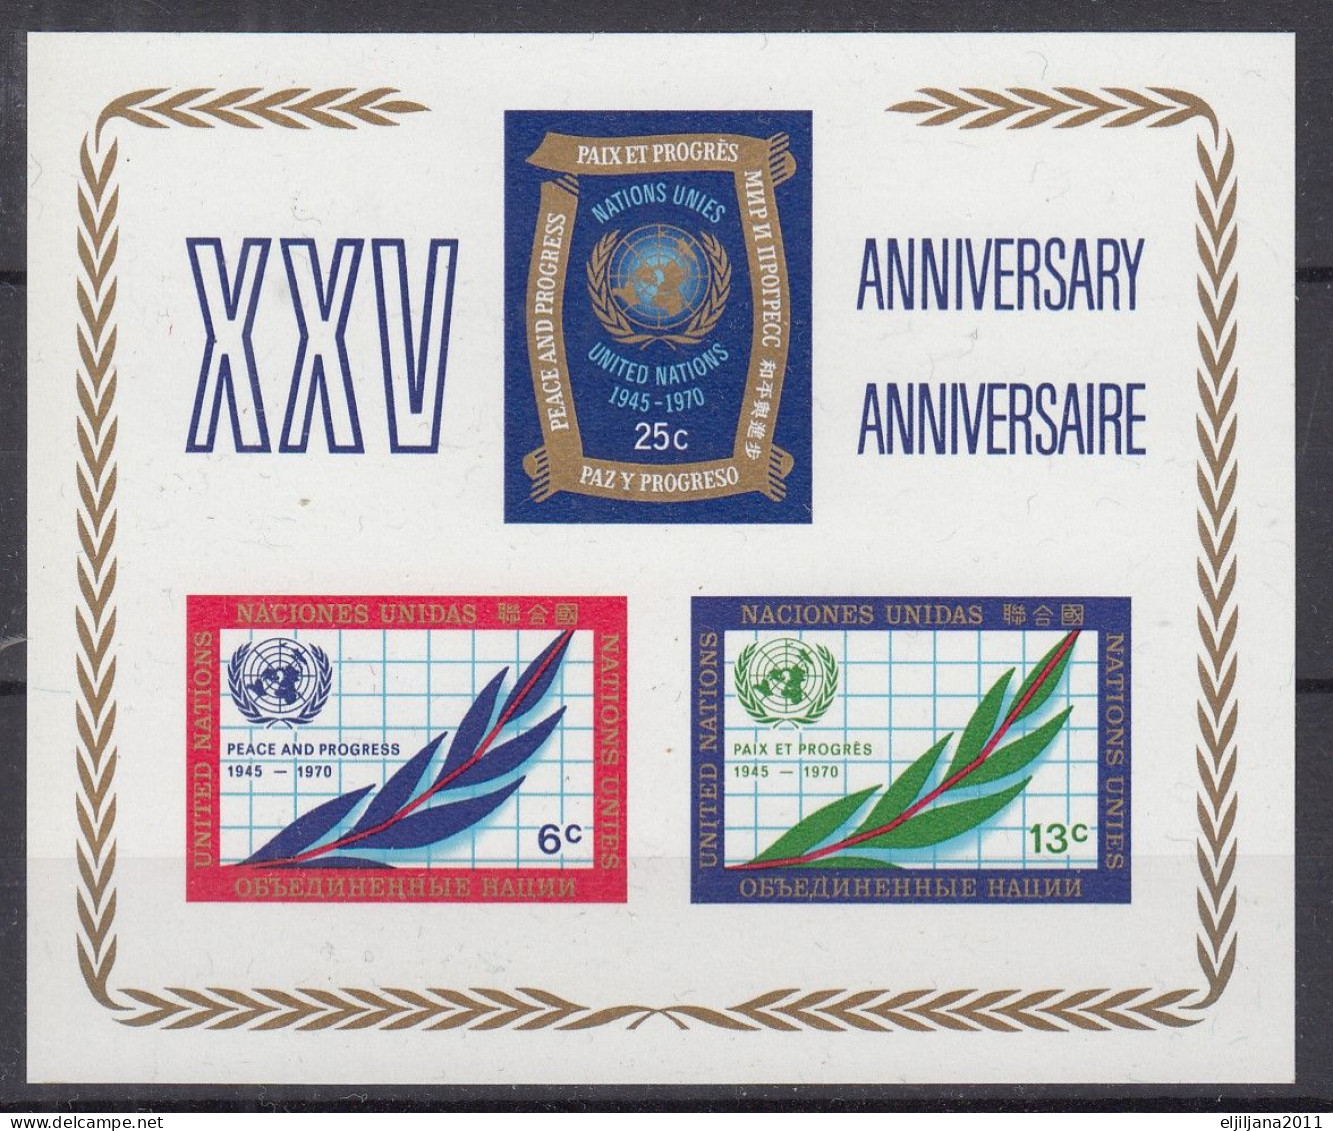 Action !! SALE !! 50 % OFF !! ⁕ UN 1970 New York ⁕ United Nations 25th Anniv. ⁕ MNH & FDC Used Block 5 - Unused Stamps